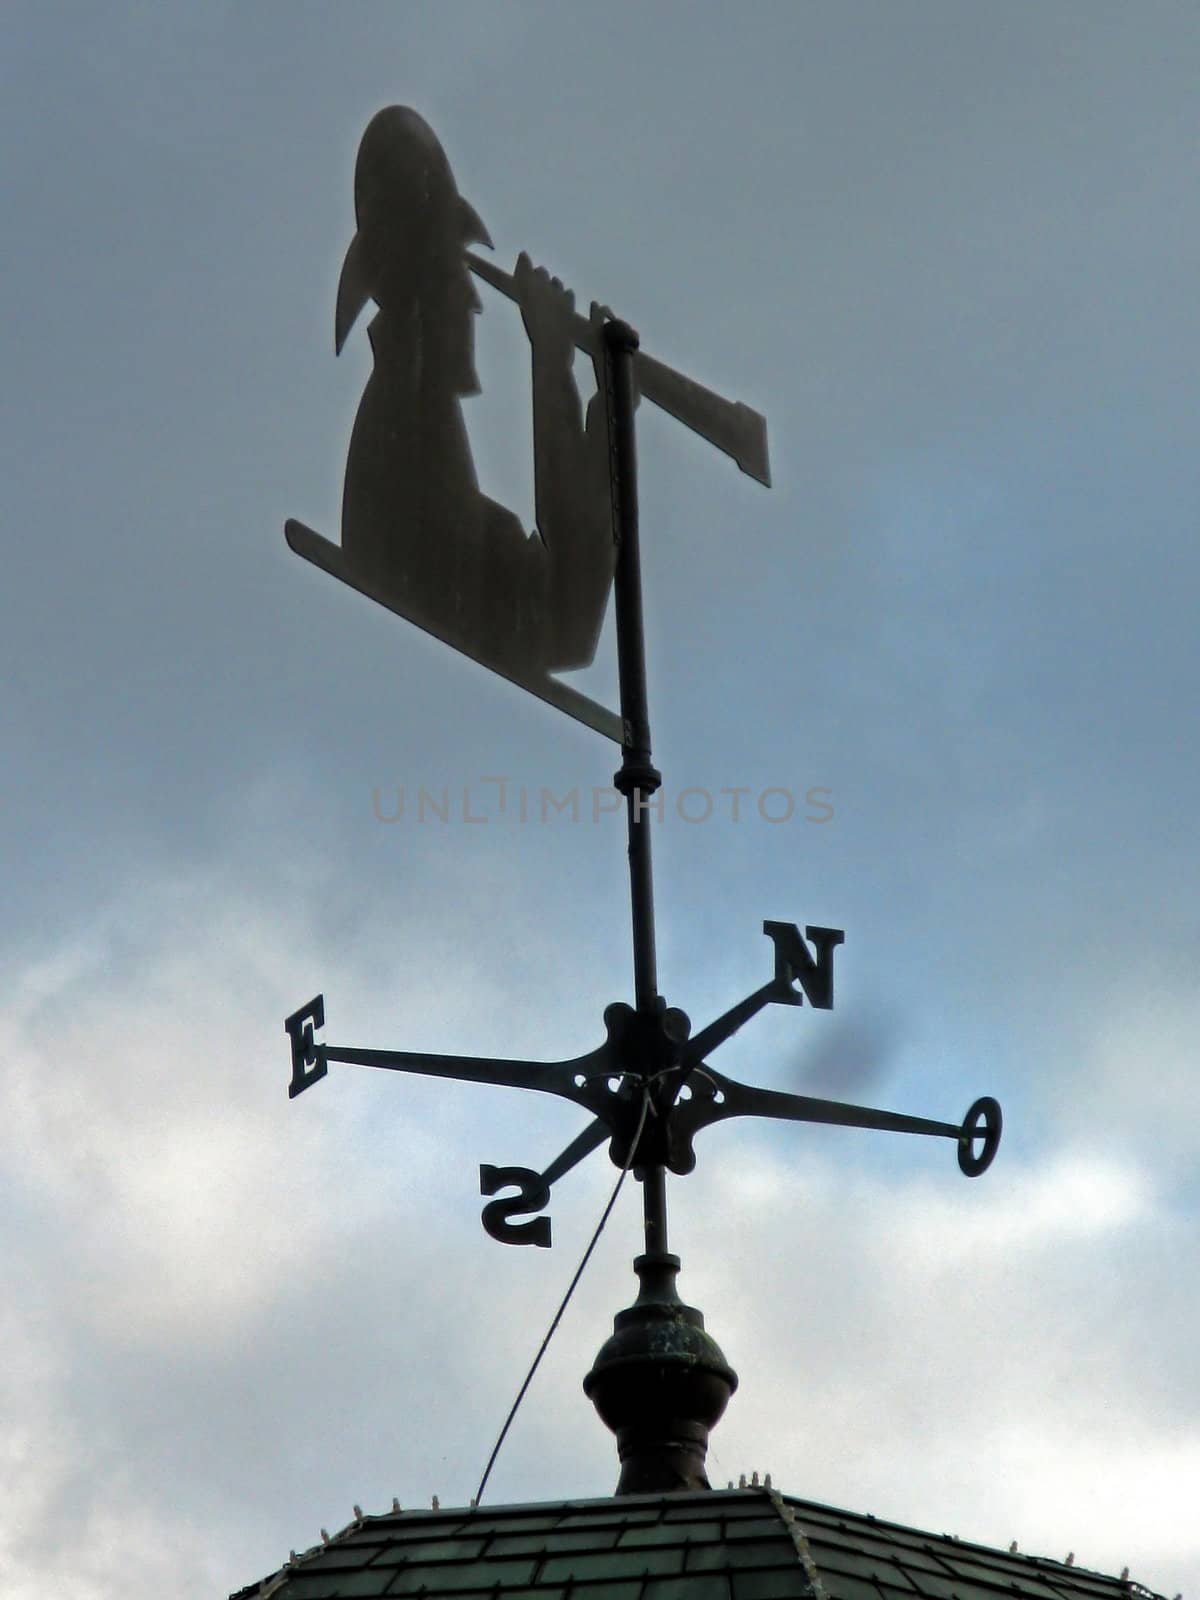 A weather vane with person looking through a telescope.